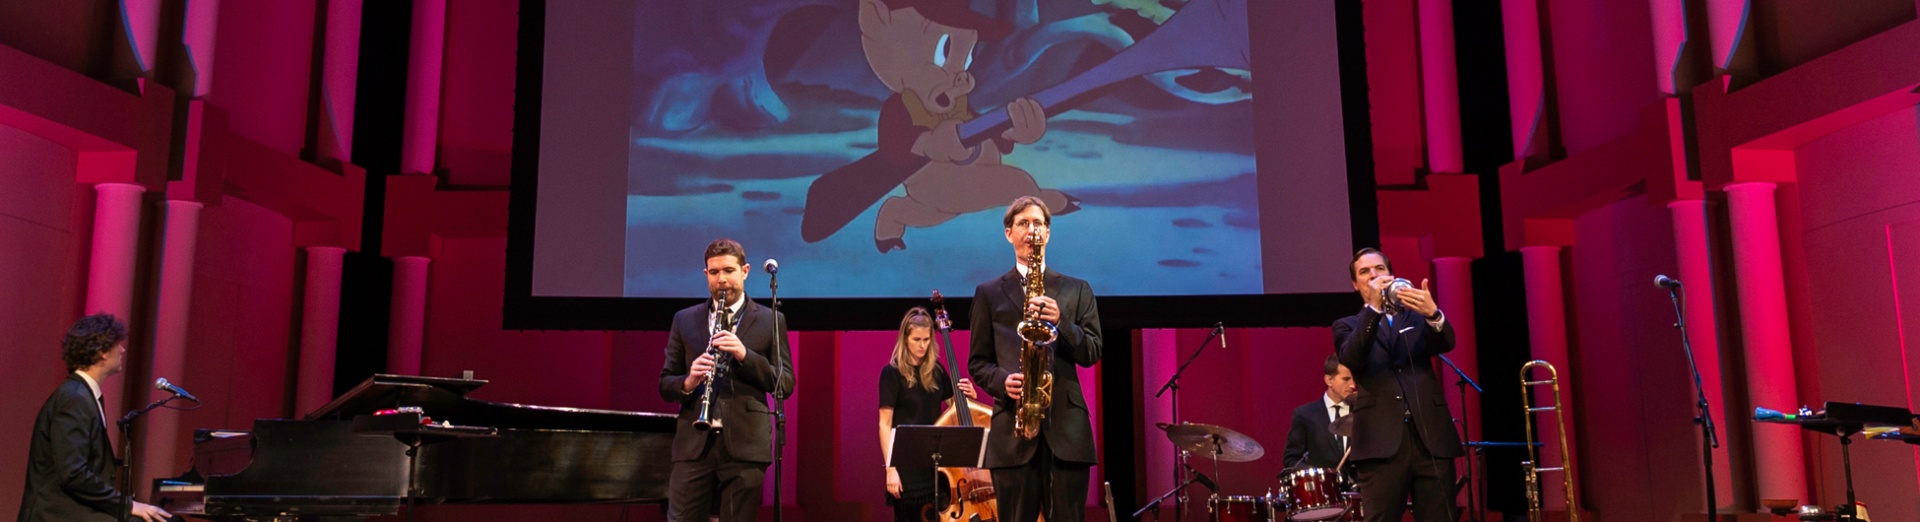 Members of the band performing on stage while a classic cartoon plays on a screen behind them.